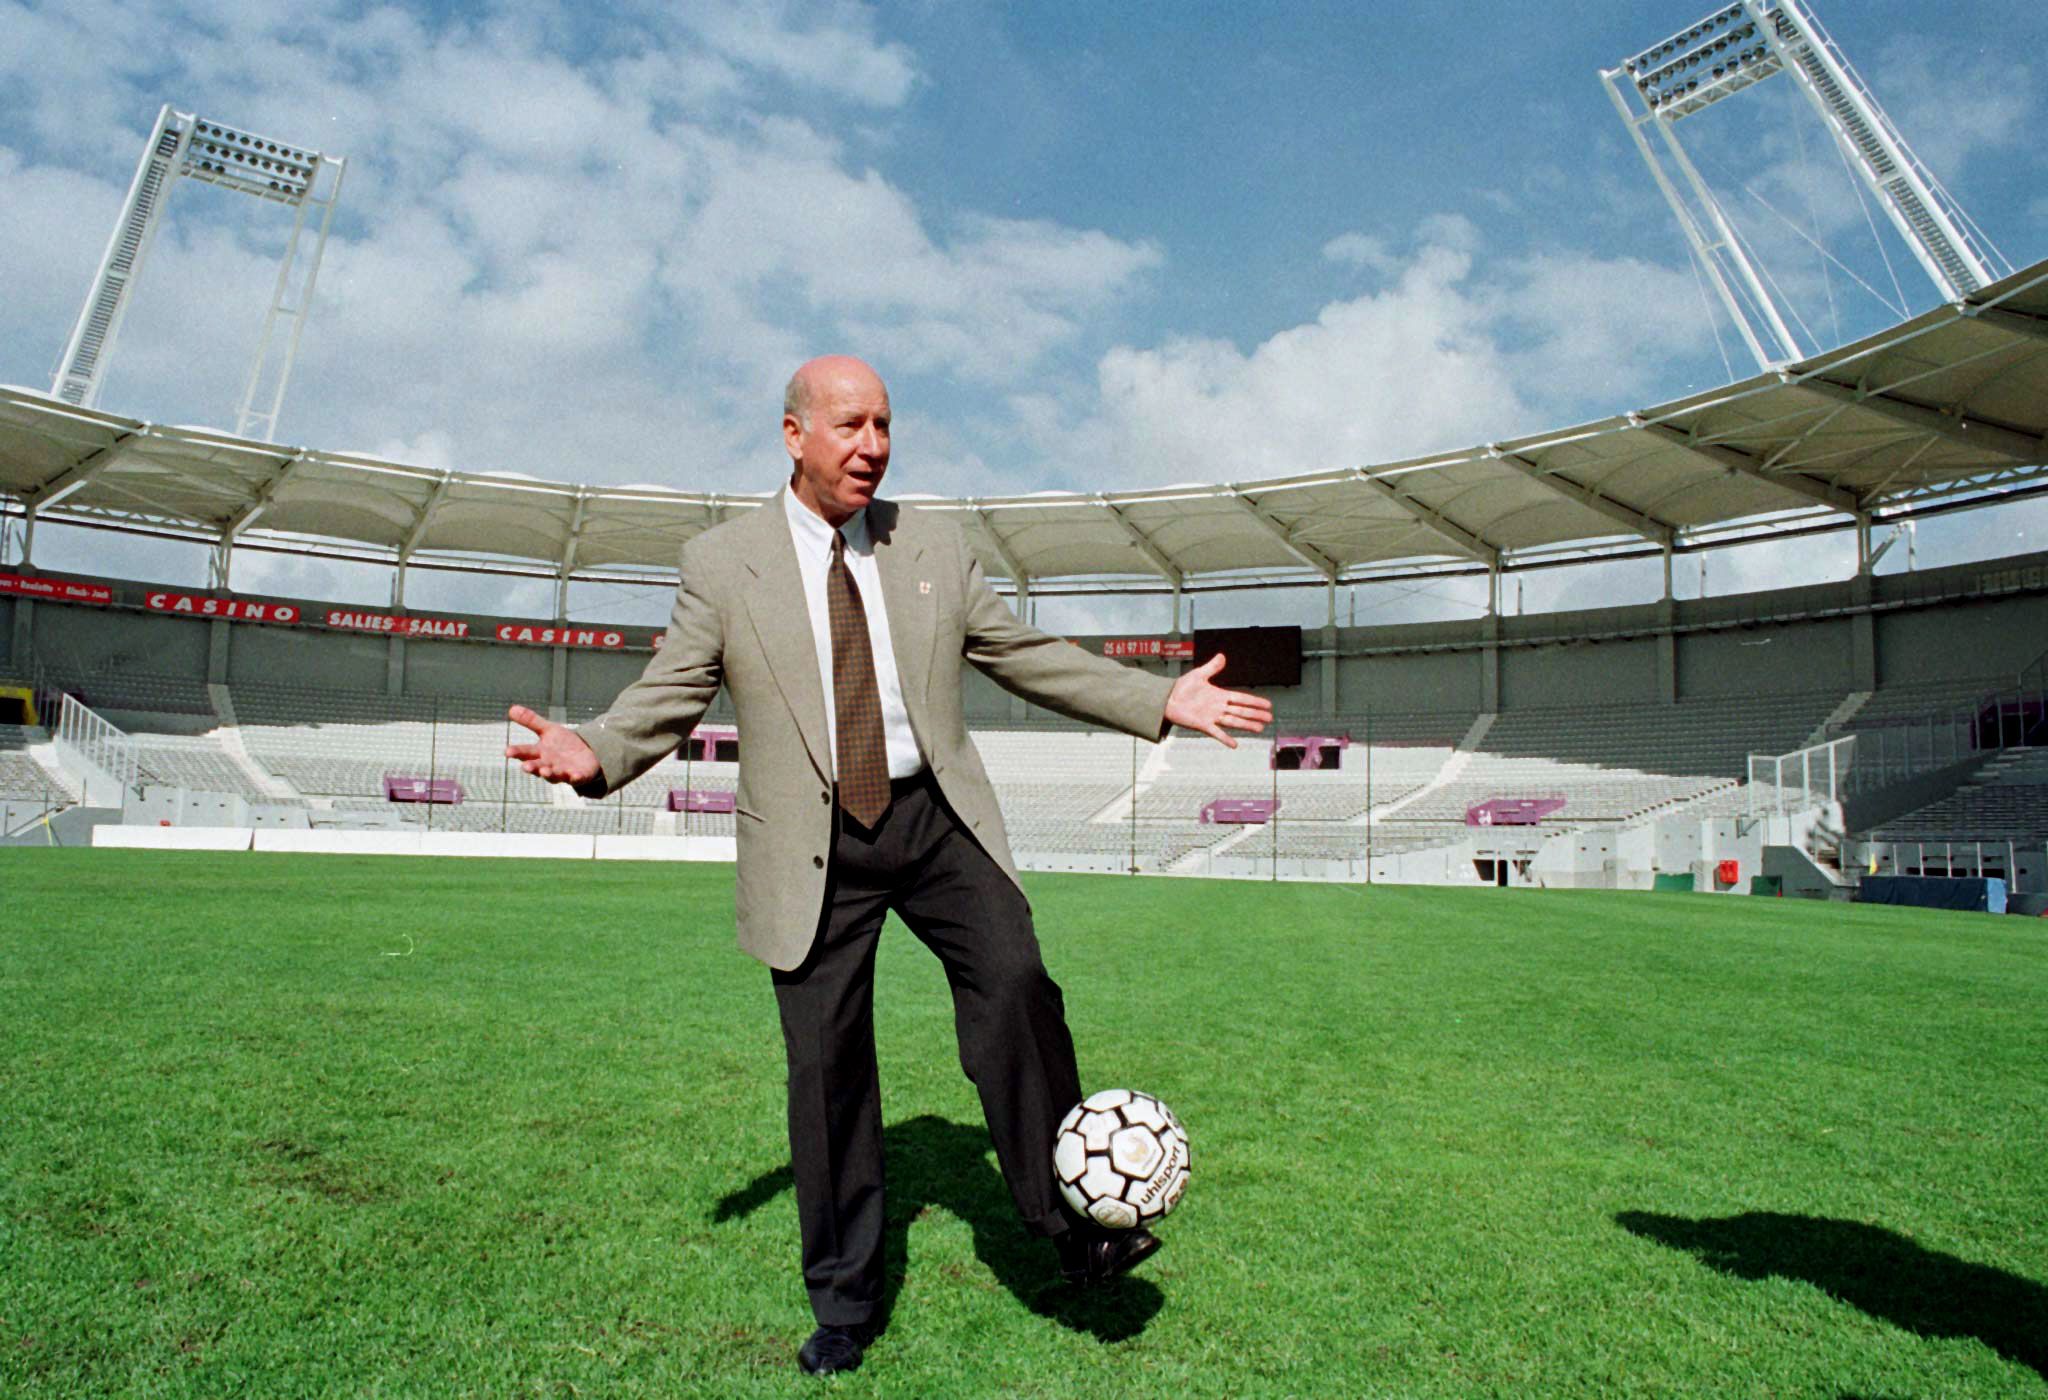 Sir Bobby Charlton, former Manchester United and British international soccer player, plays with a ball during a visit to the new Toulouse Stadium, April 28. England will meet Romania in Toulouse during the 16th soccer World Cup which will take place in France in June 1998.

REUTERS